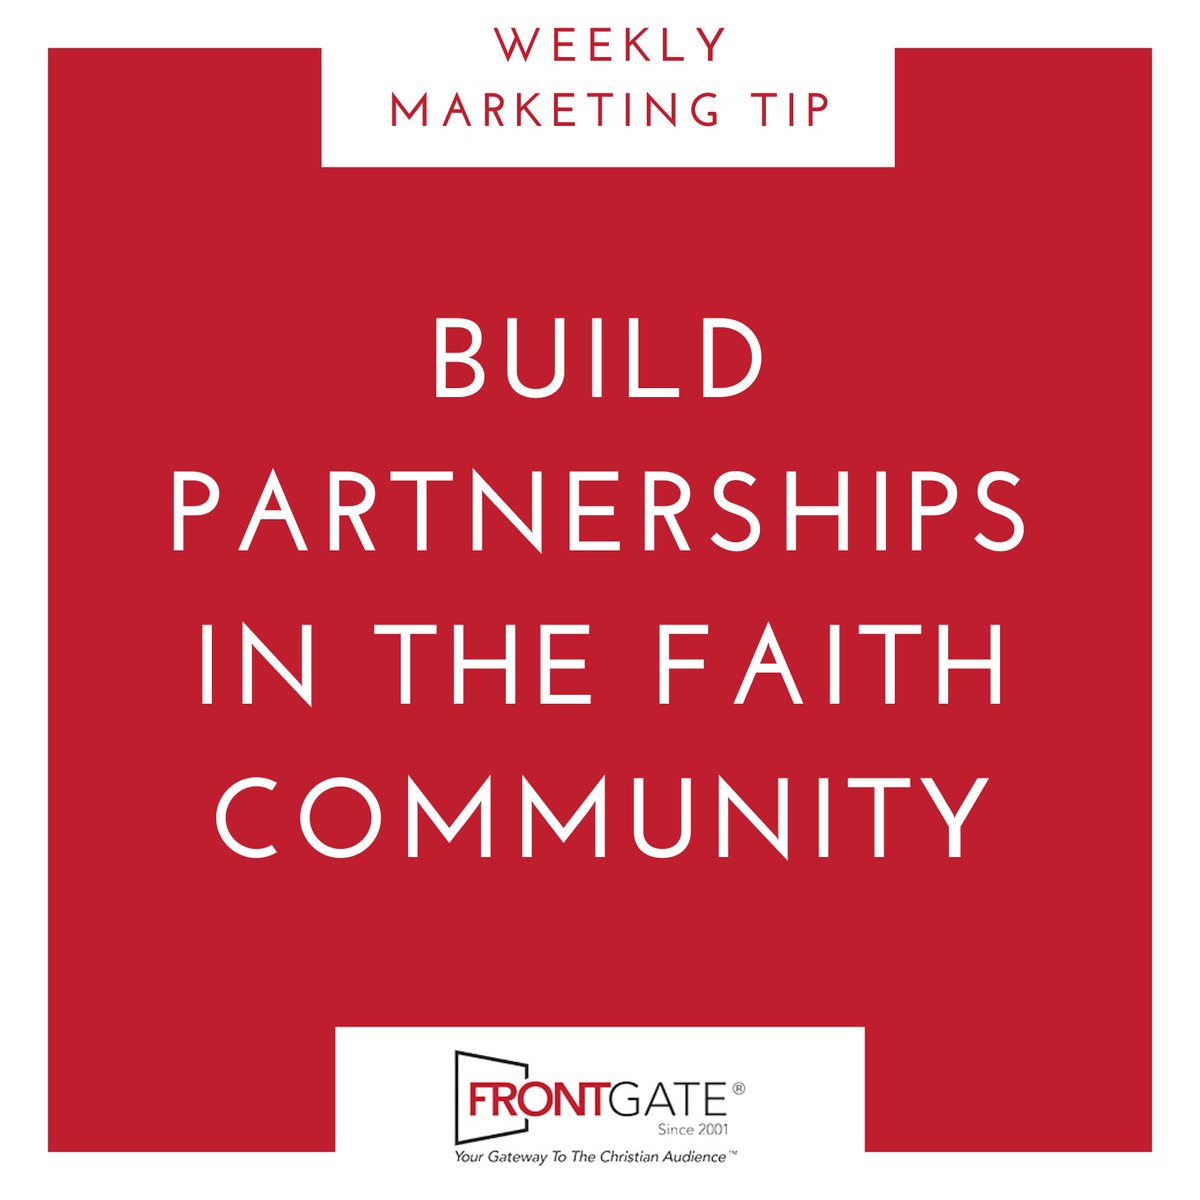 Do you want a guaranteed way to expand your reach to the Faith and Family audience?

Partner with other Christian businesses, ministries, and organizations!

#socialimpact #digitalmarketing #socialmediamarketing #onlinefundraising #charitysupport #nonprofitleader